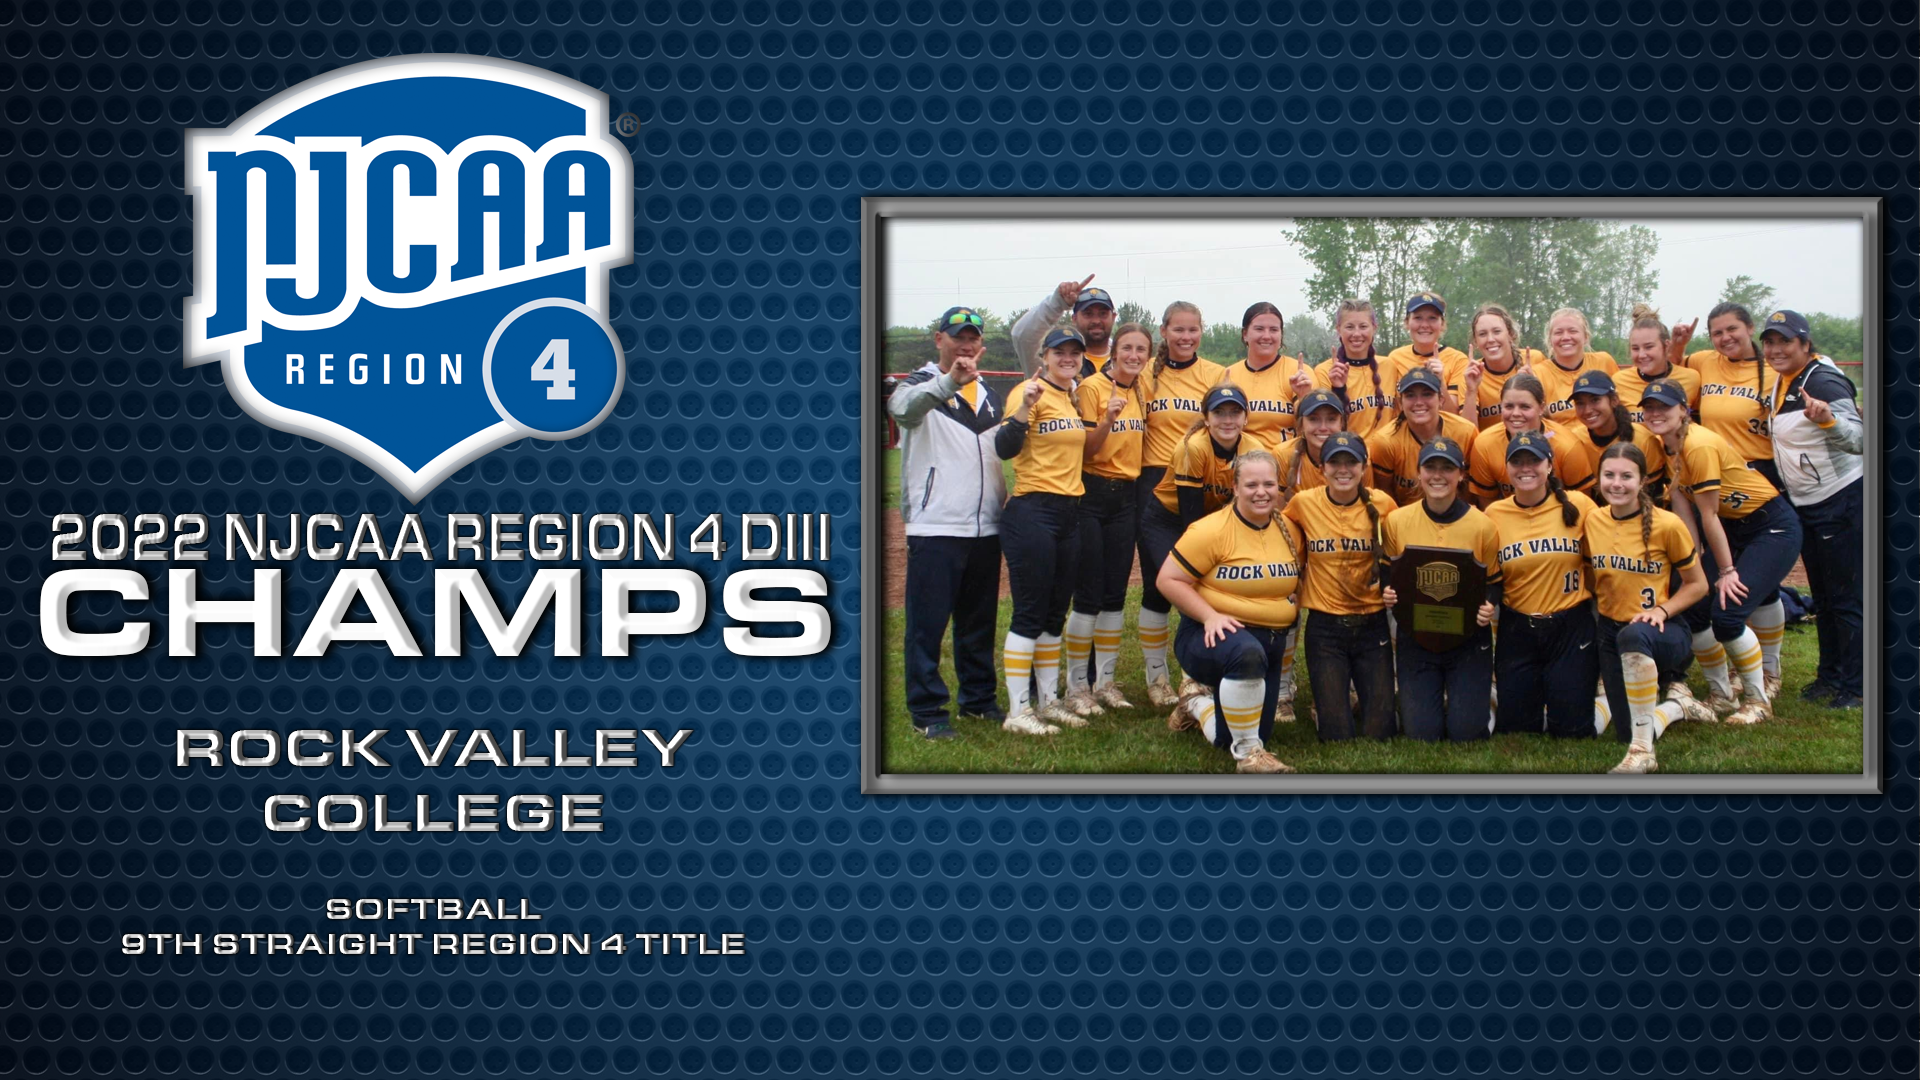 (Image courtesy of Rock Valley College Athletics)